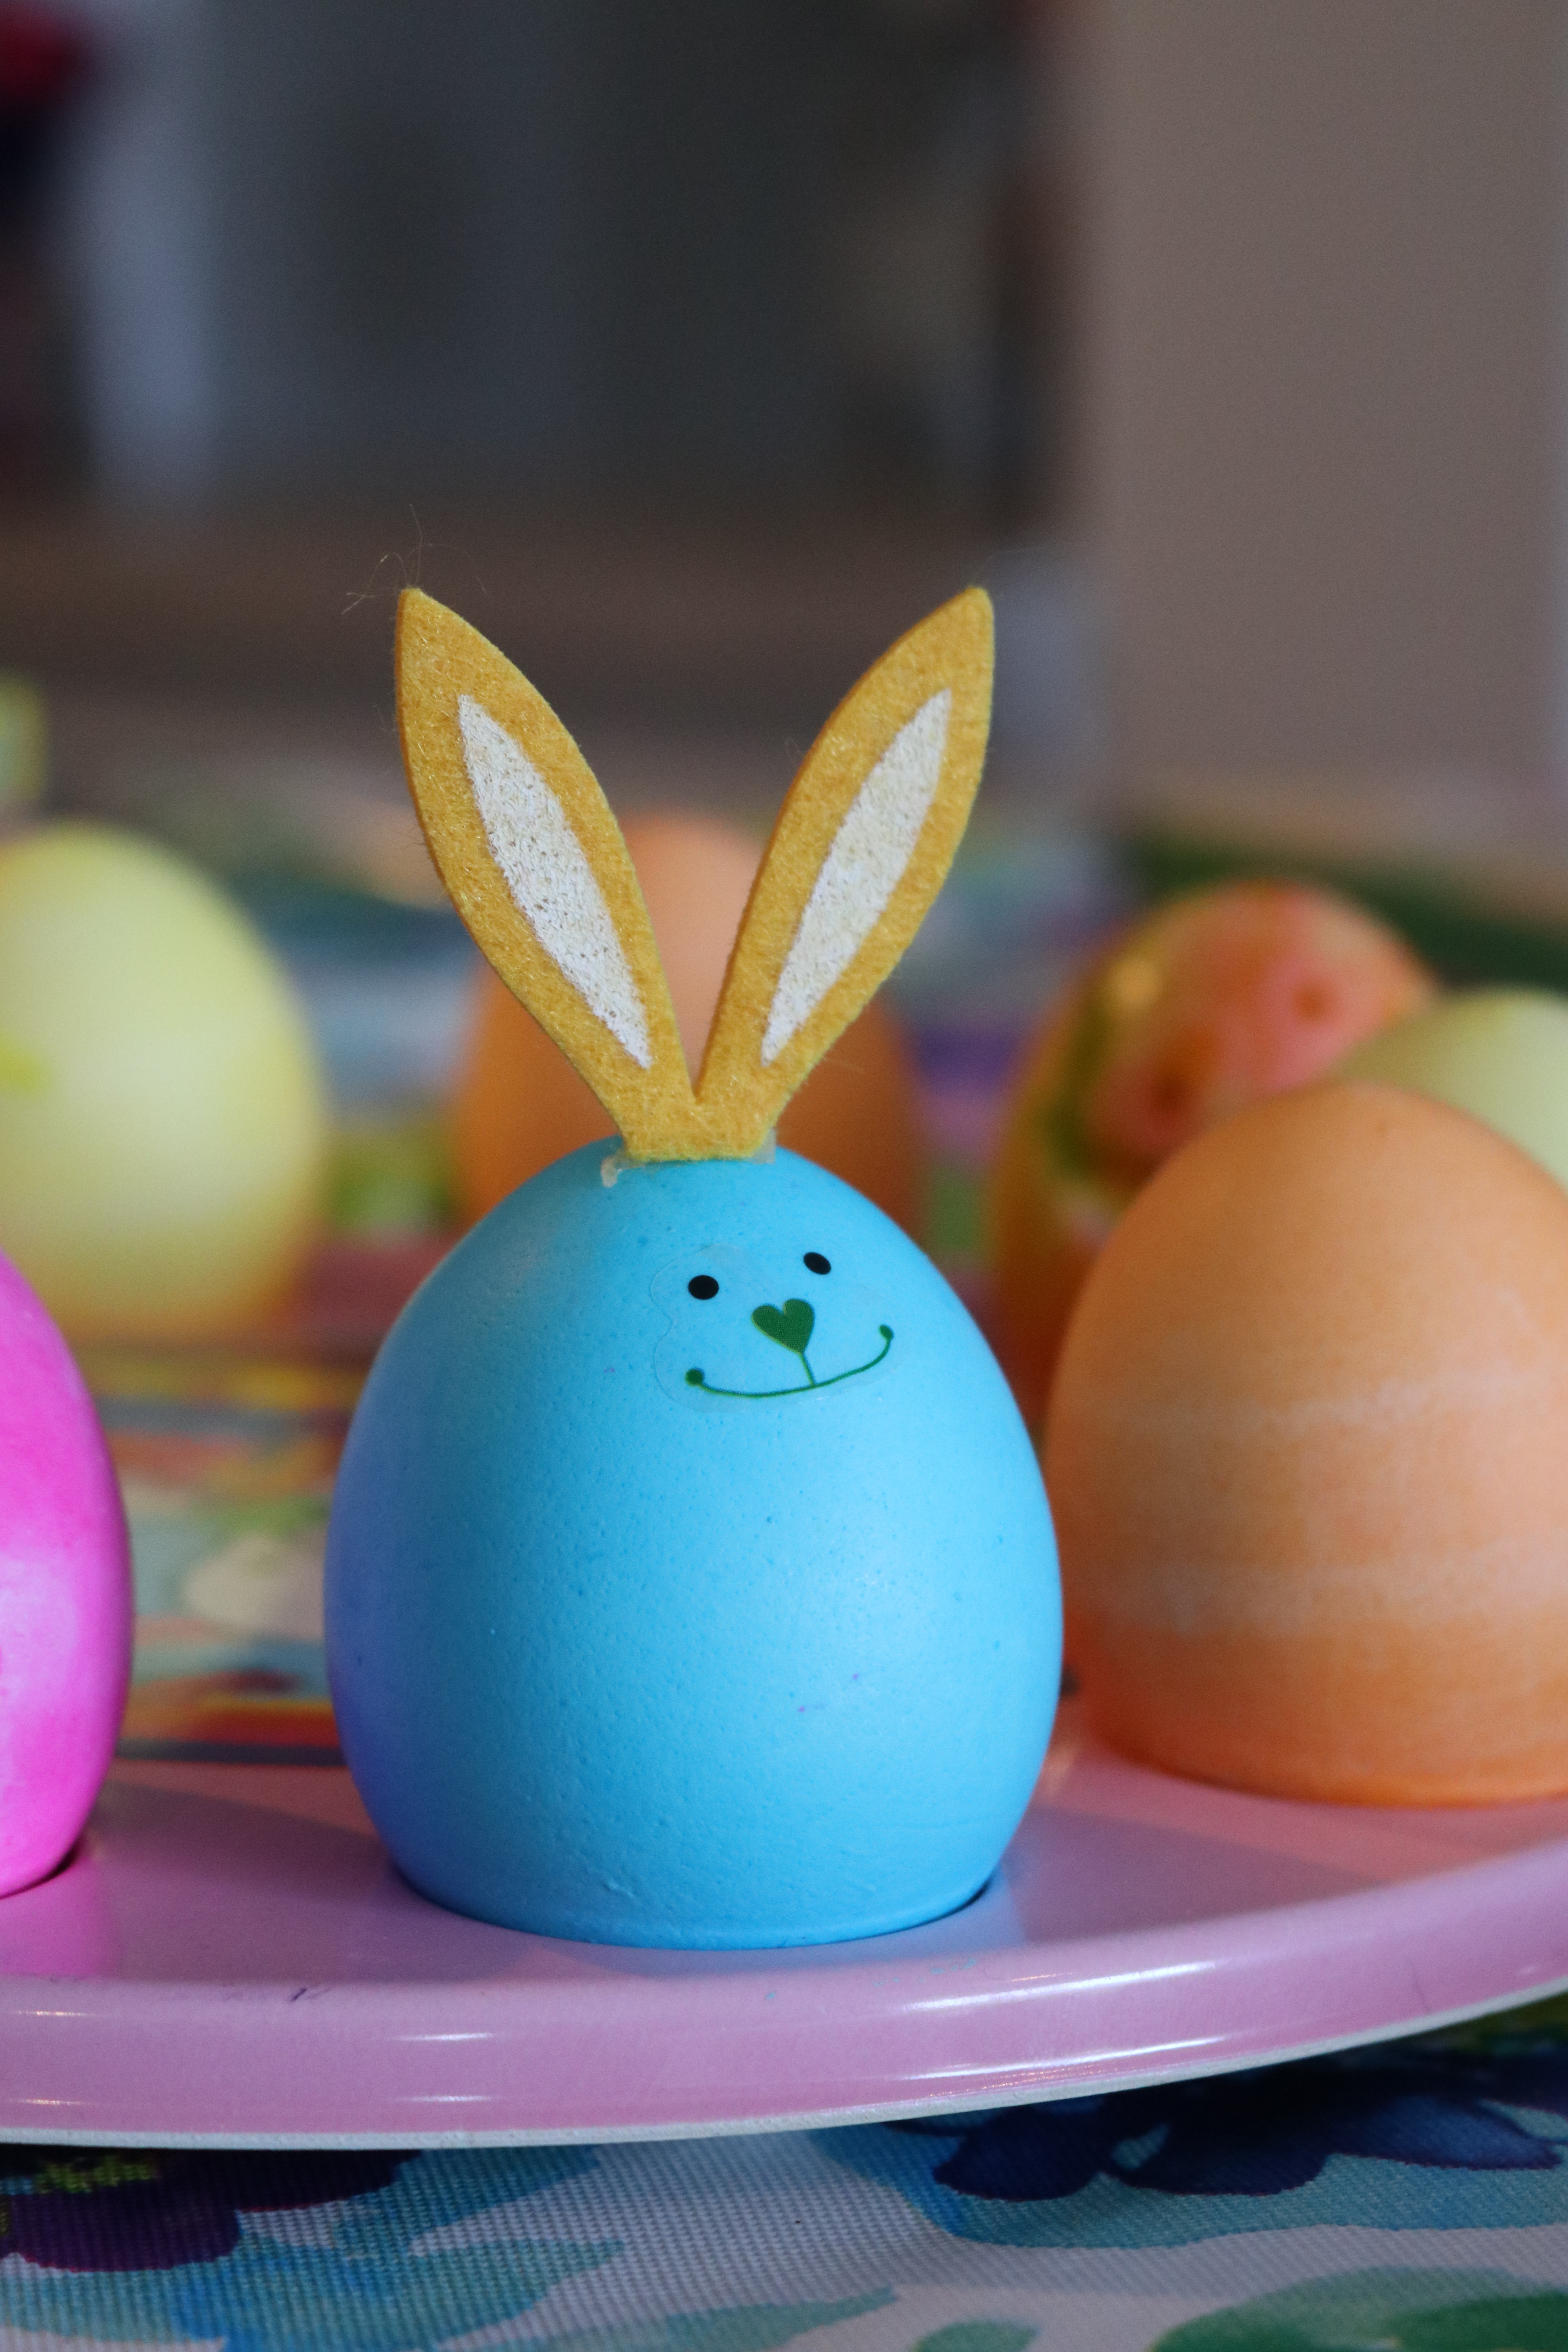 Easter Eggs and Bunny, Blue painted egg with rabbit ears